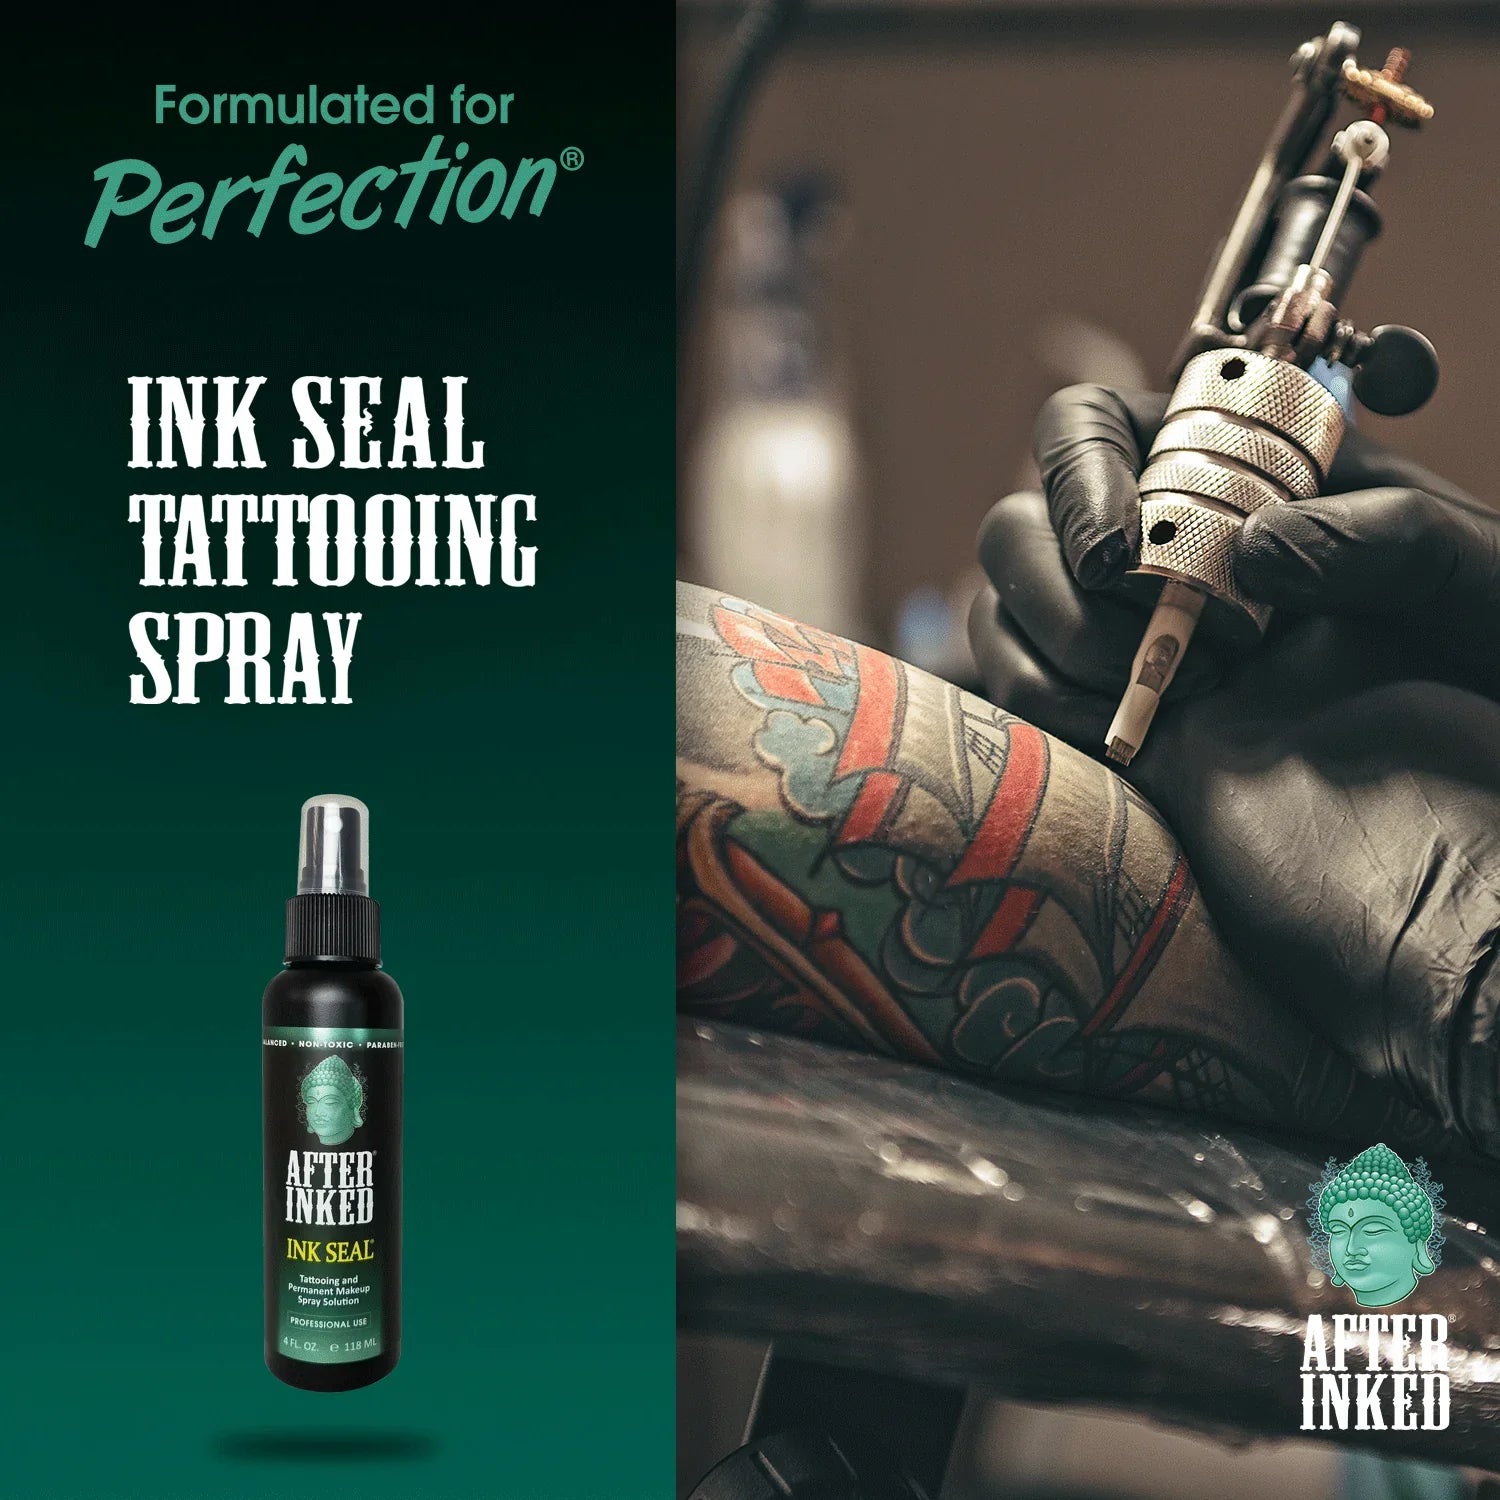 After Inked Ink Seal Tattoo Spray 4 oz aftercare